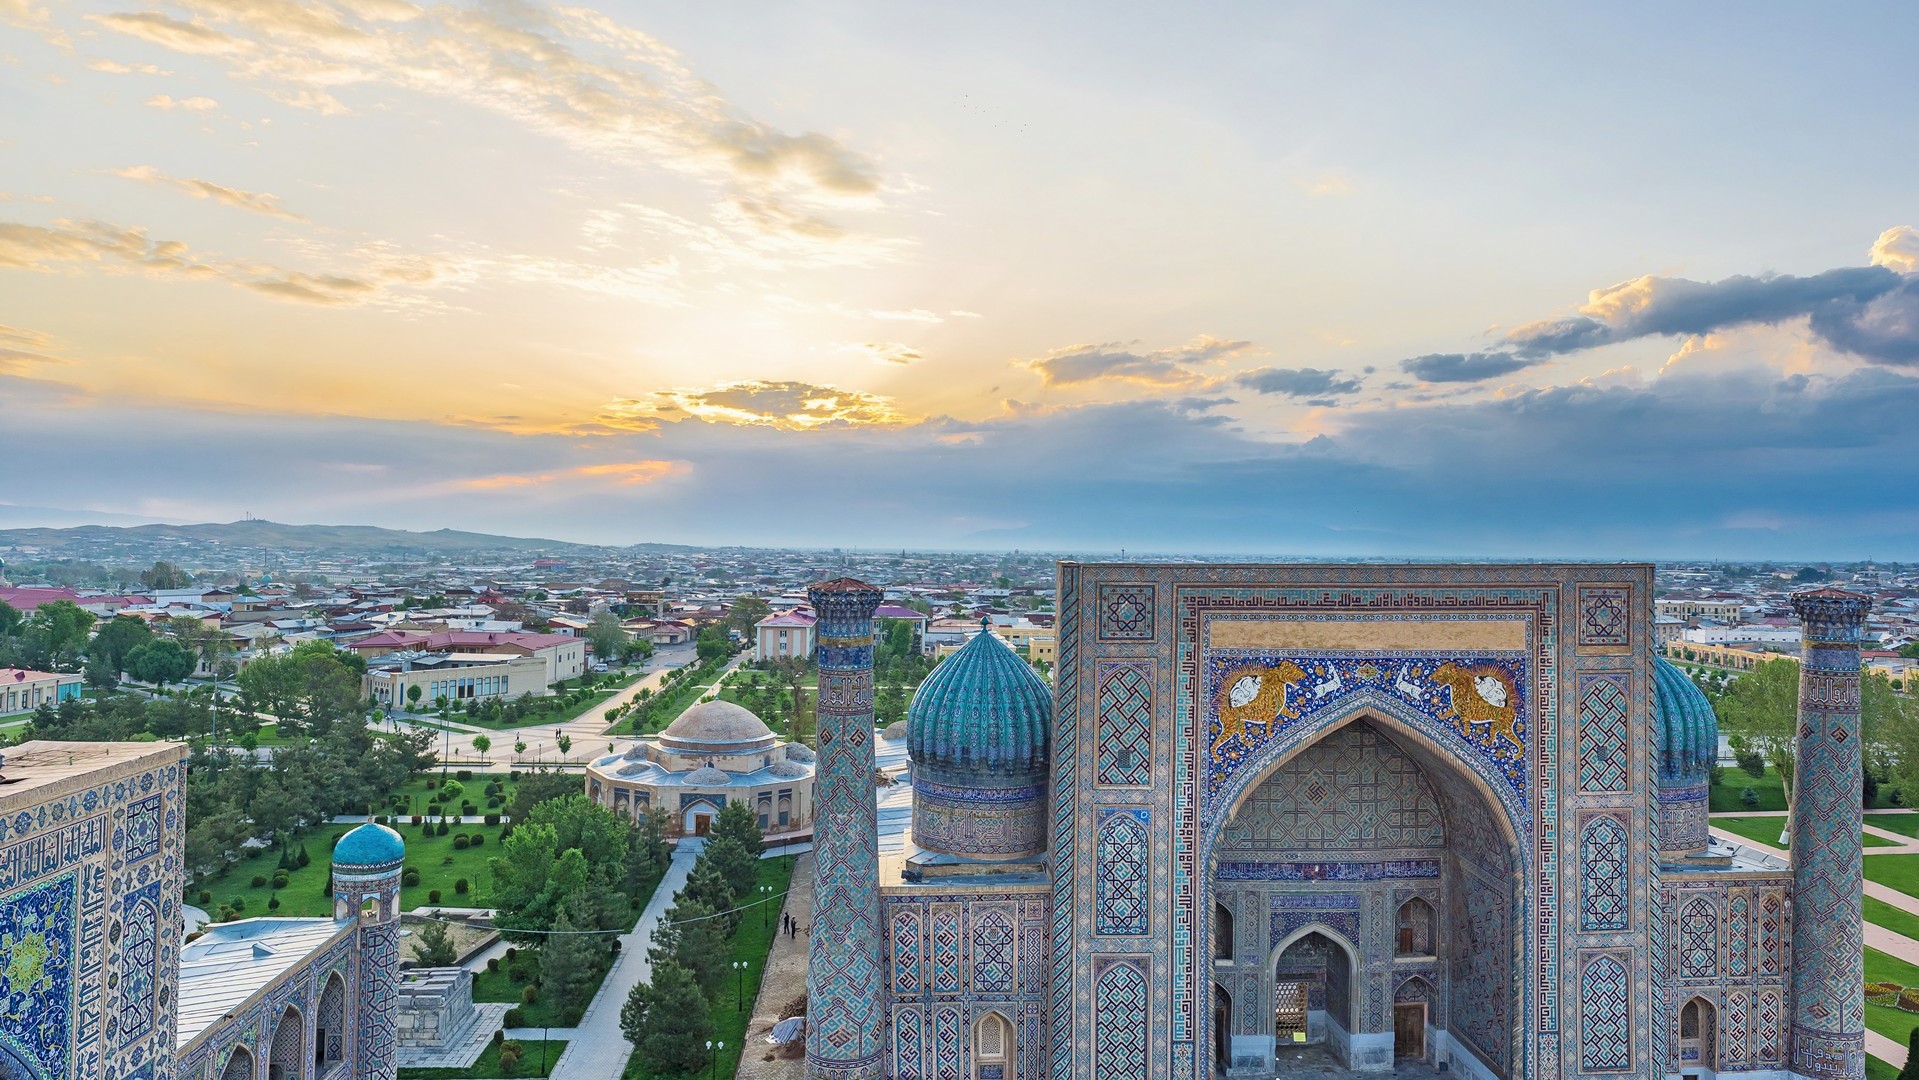 One of the minarets on Registan square can be the best place to watch the sunrise, Samarkand, Uzbekistan.